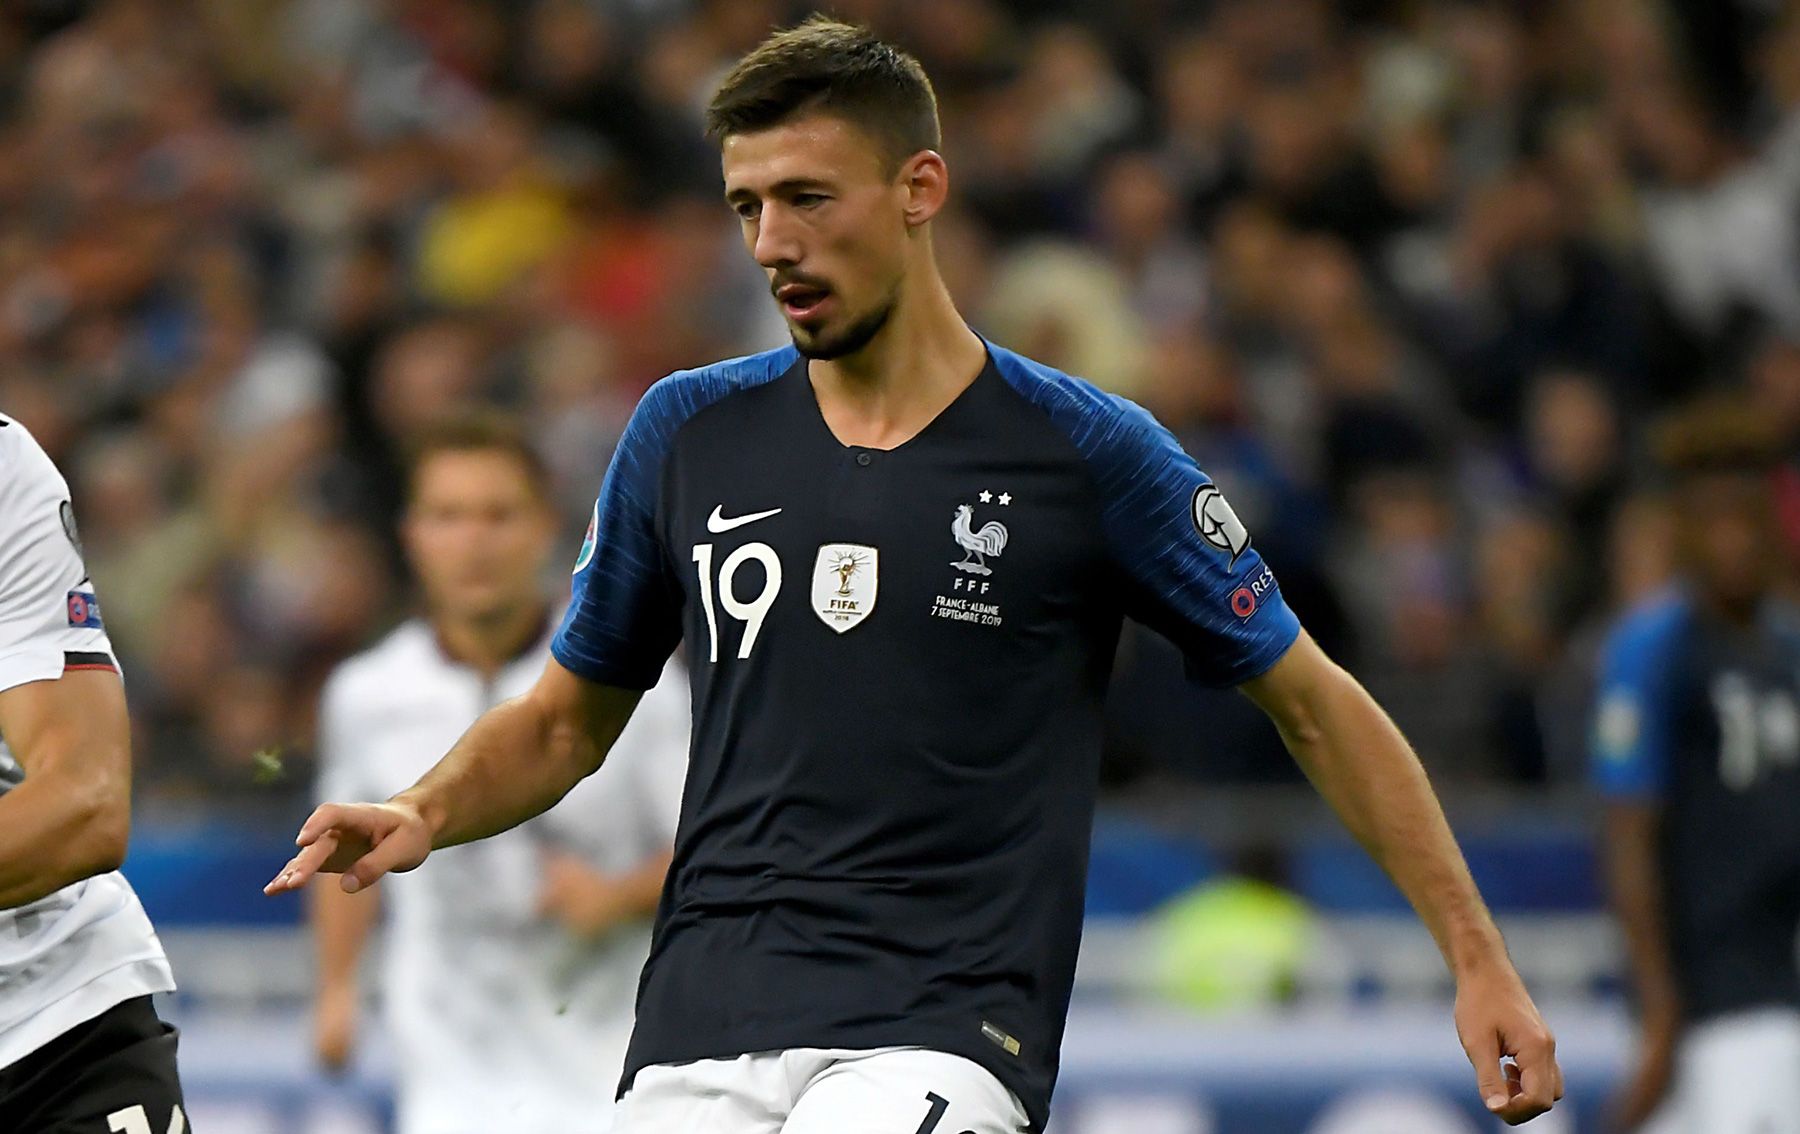 Clément Lenglet in a match with the selection of France